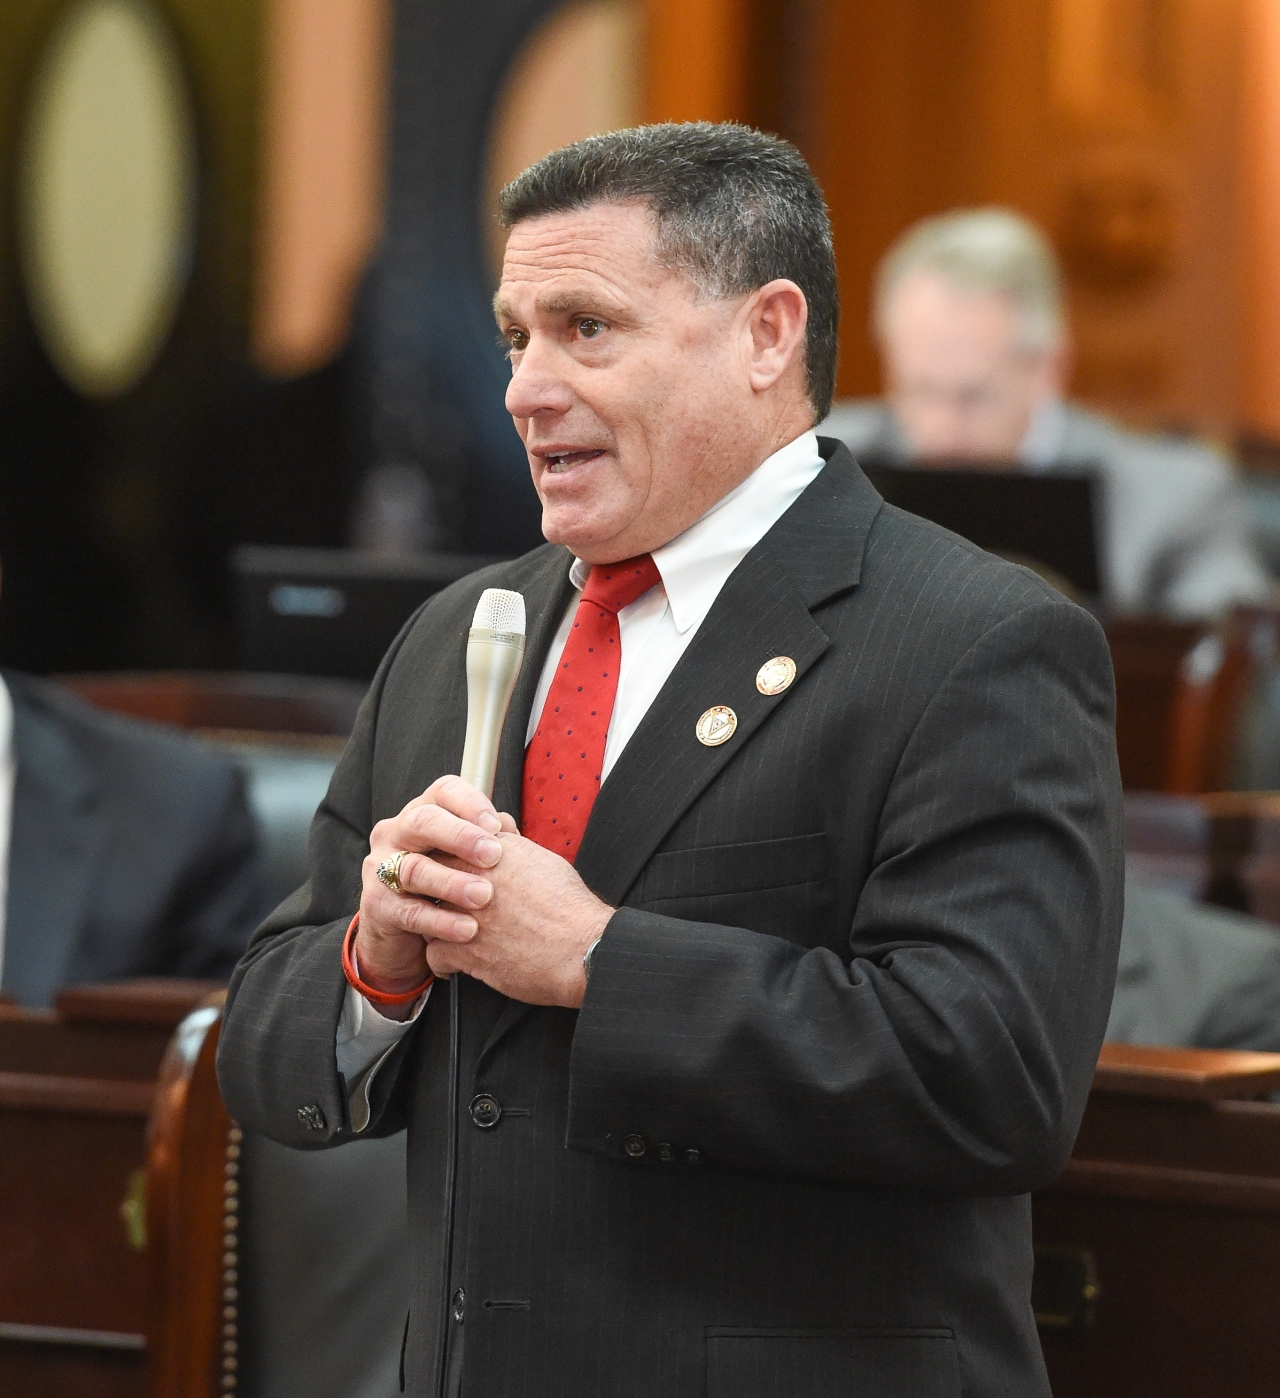 Rep. Rick Perales Recognizes "Vietnam Veterans' Day" During House Session